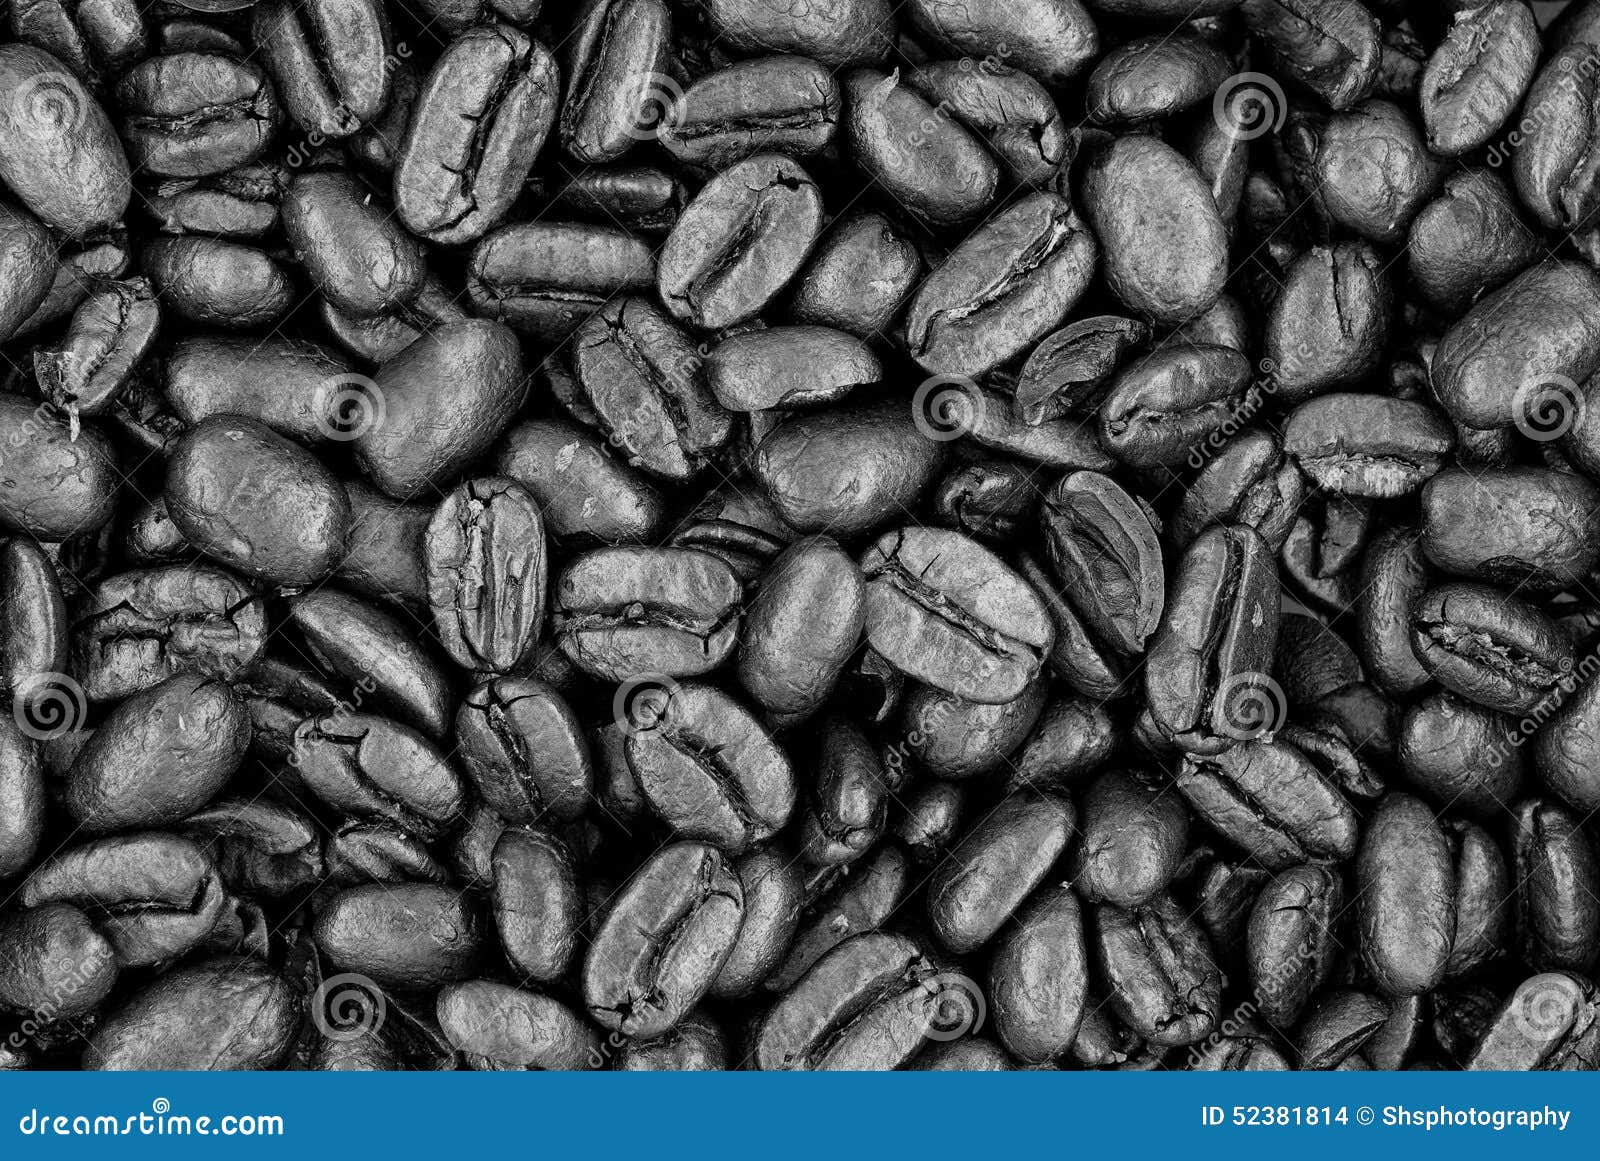 Fresh Roasted Coffee  Beans  Black  And White Stock Photo 